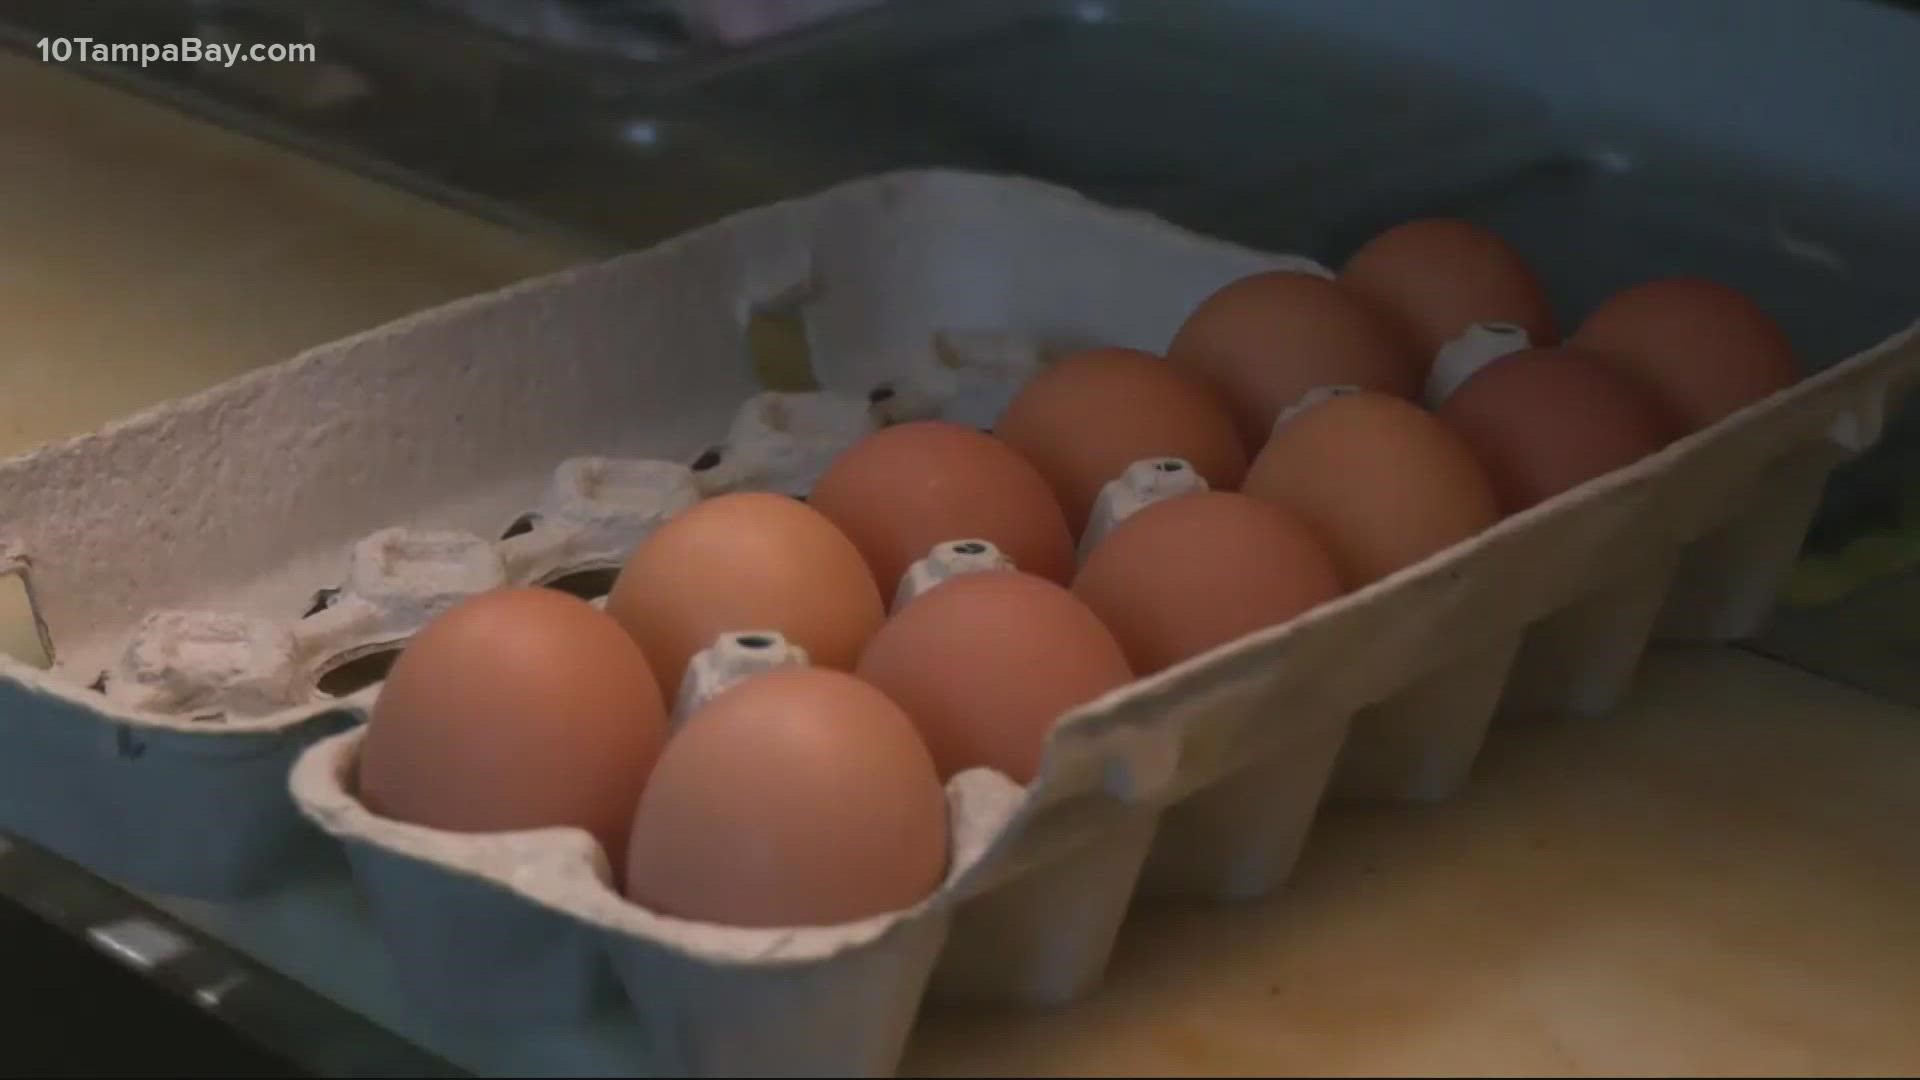 The USDA says the price of eggs has gone up more than 50 cents from this time last year.